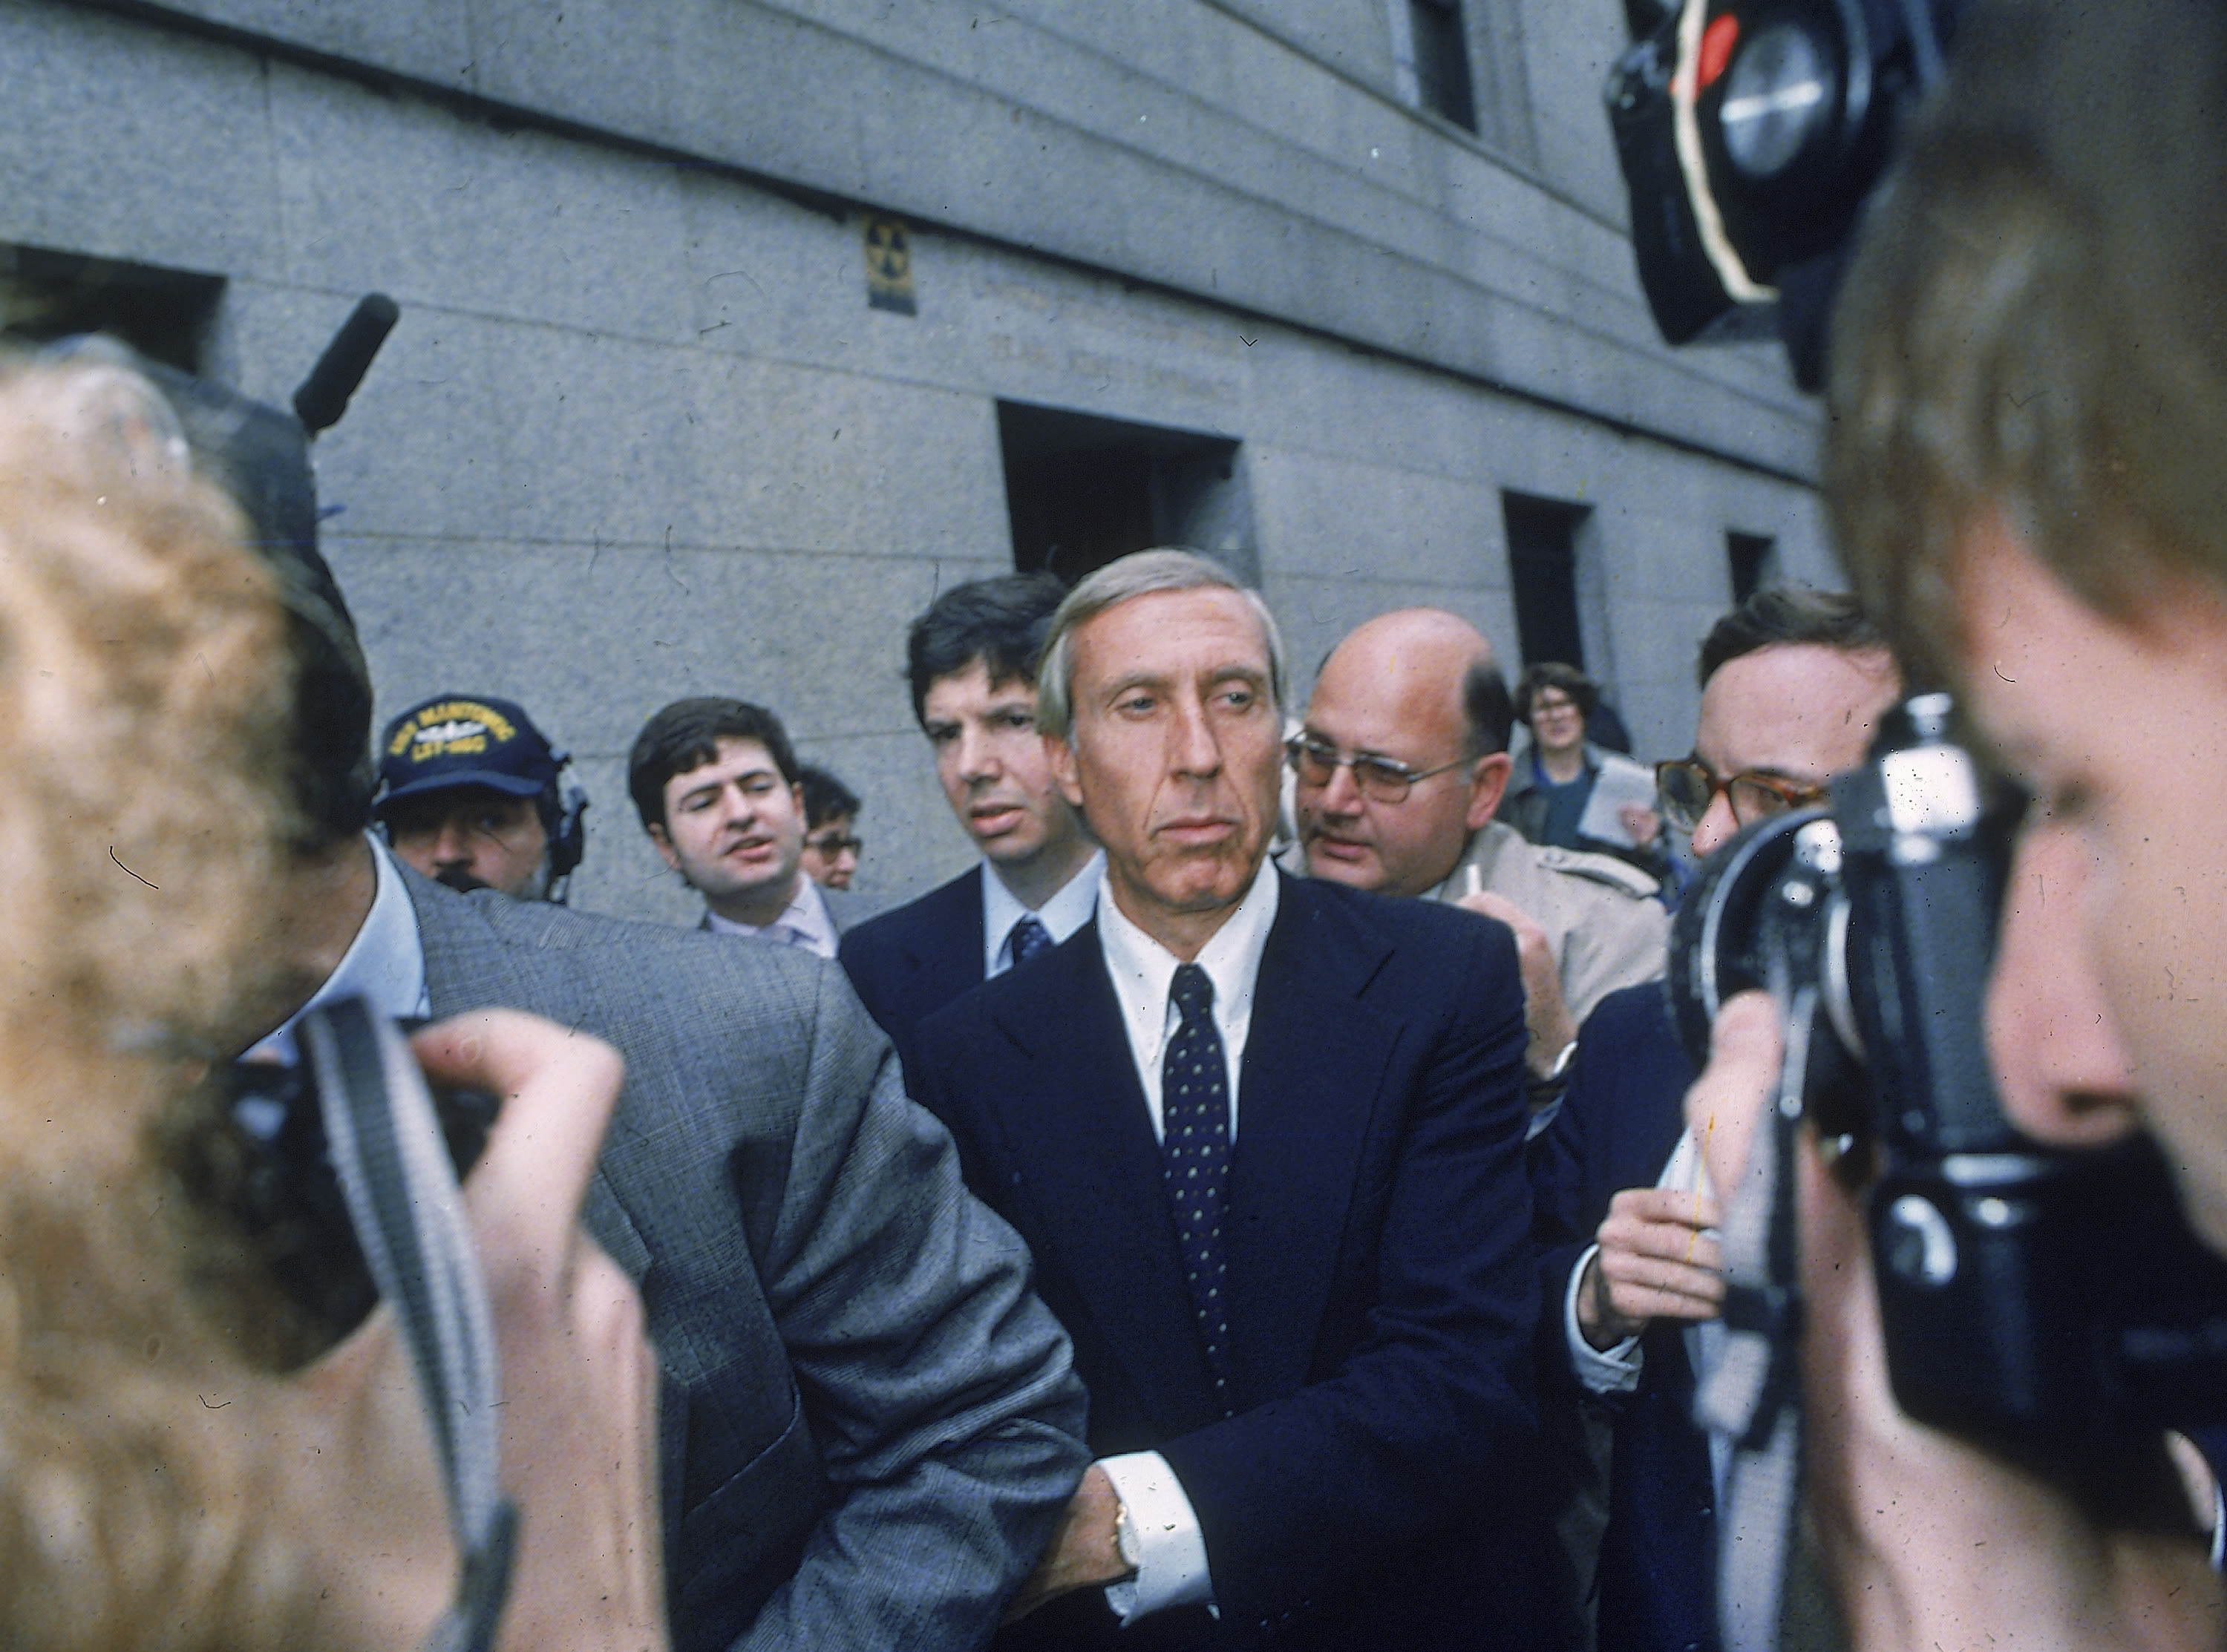 Ivan Boesky, convicted of insider trading in 1980s, dies at 87